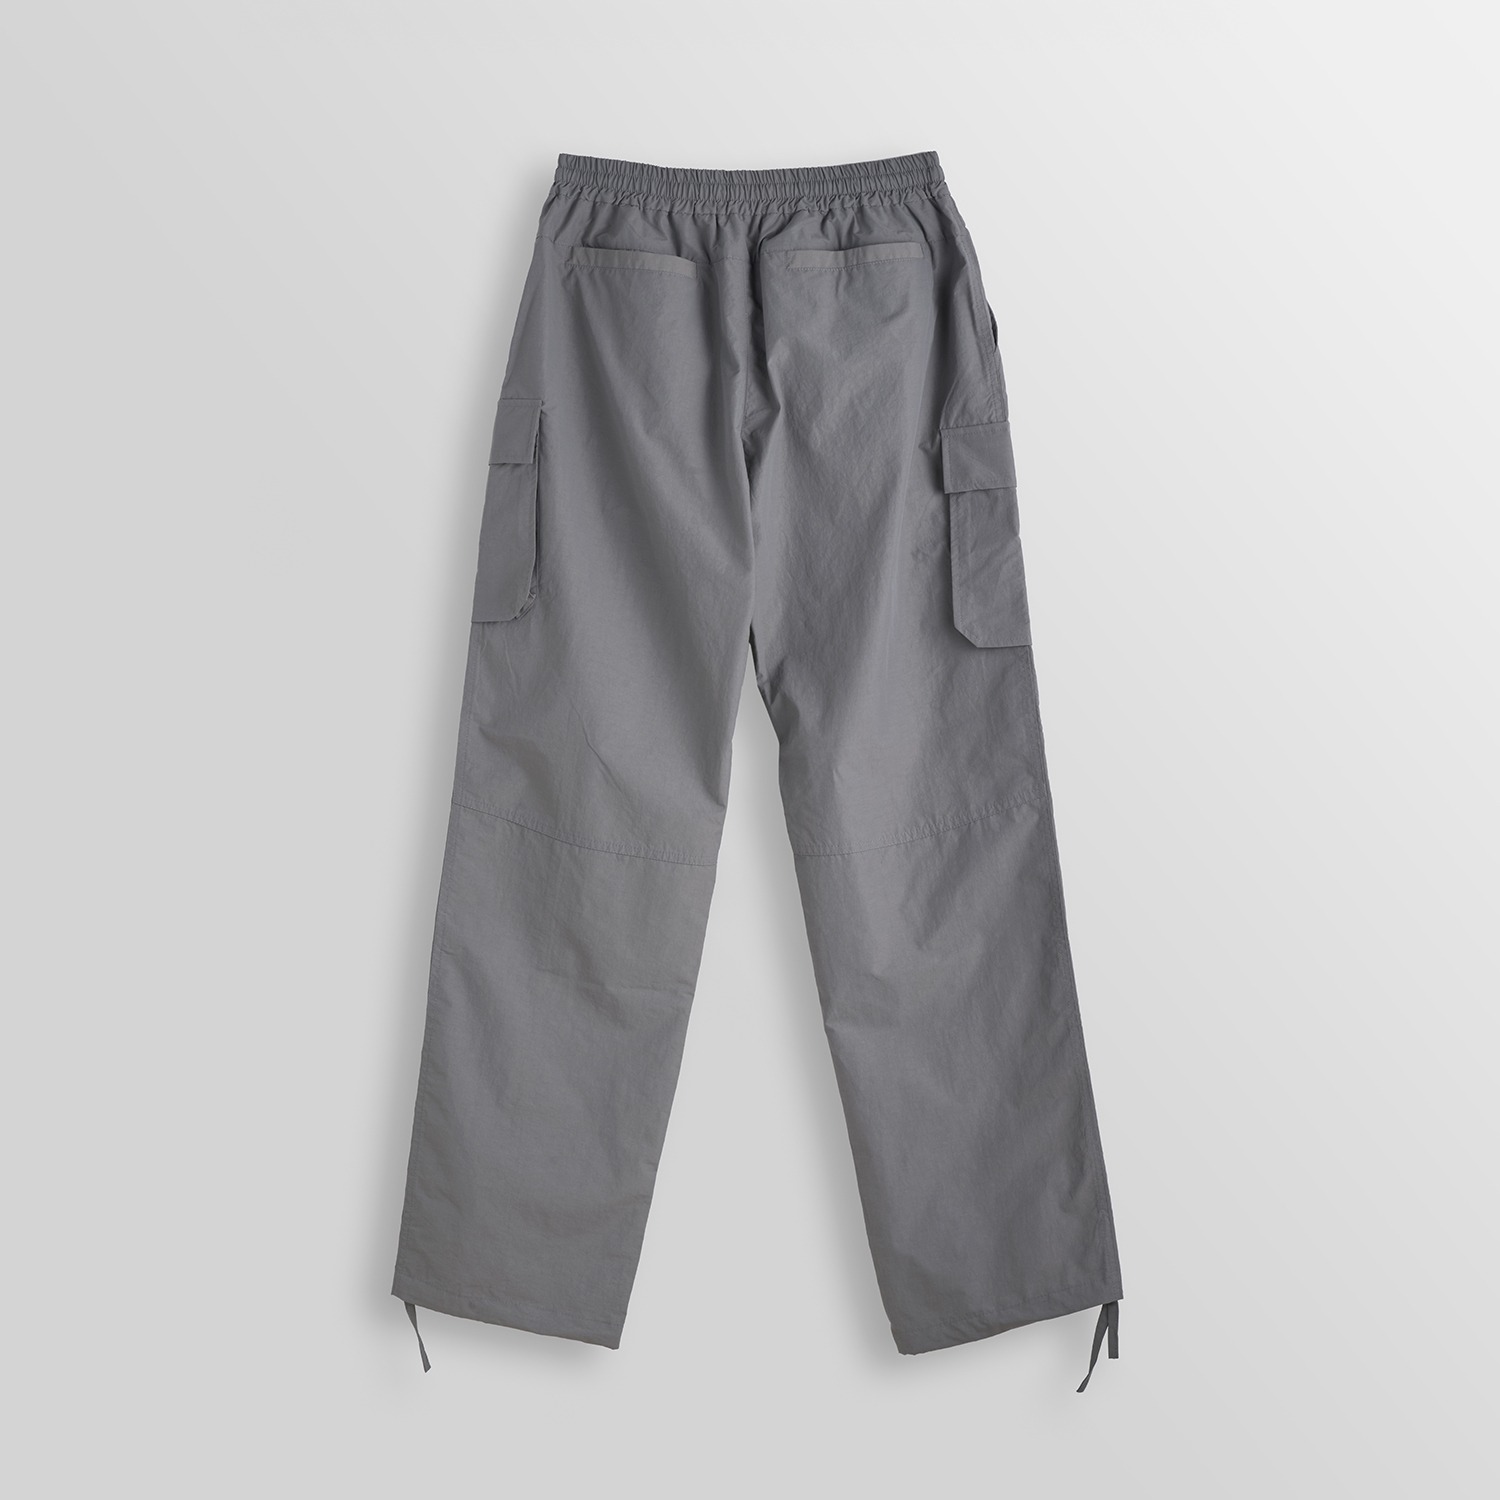 TWO POCKET ESSENTIAL CARGO PANTS (LIGHT GREY)